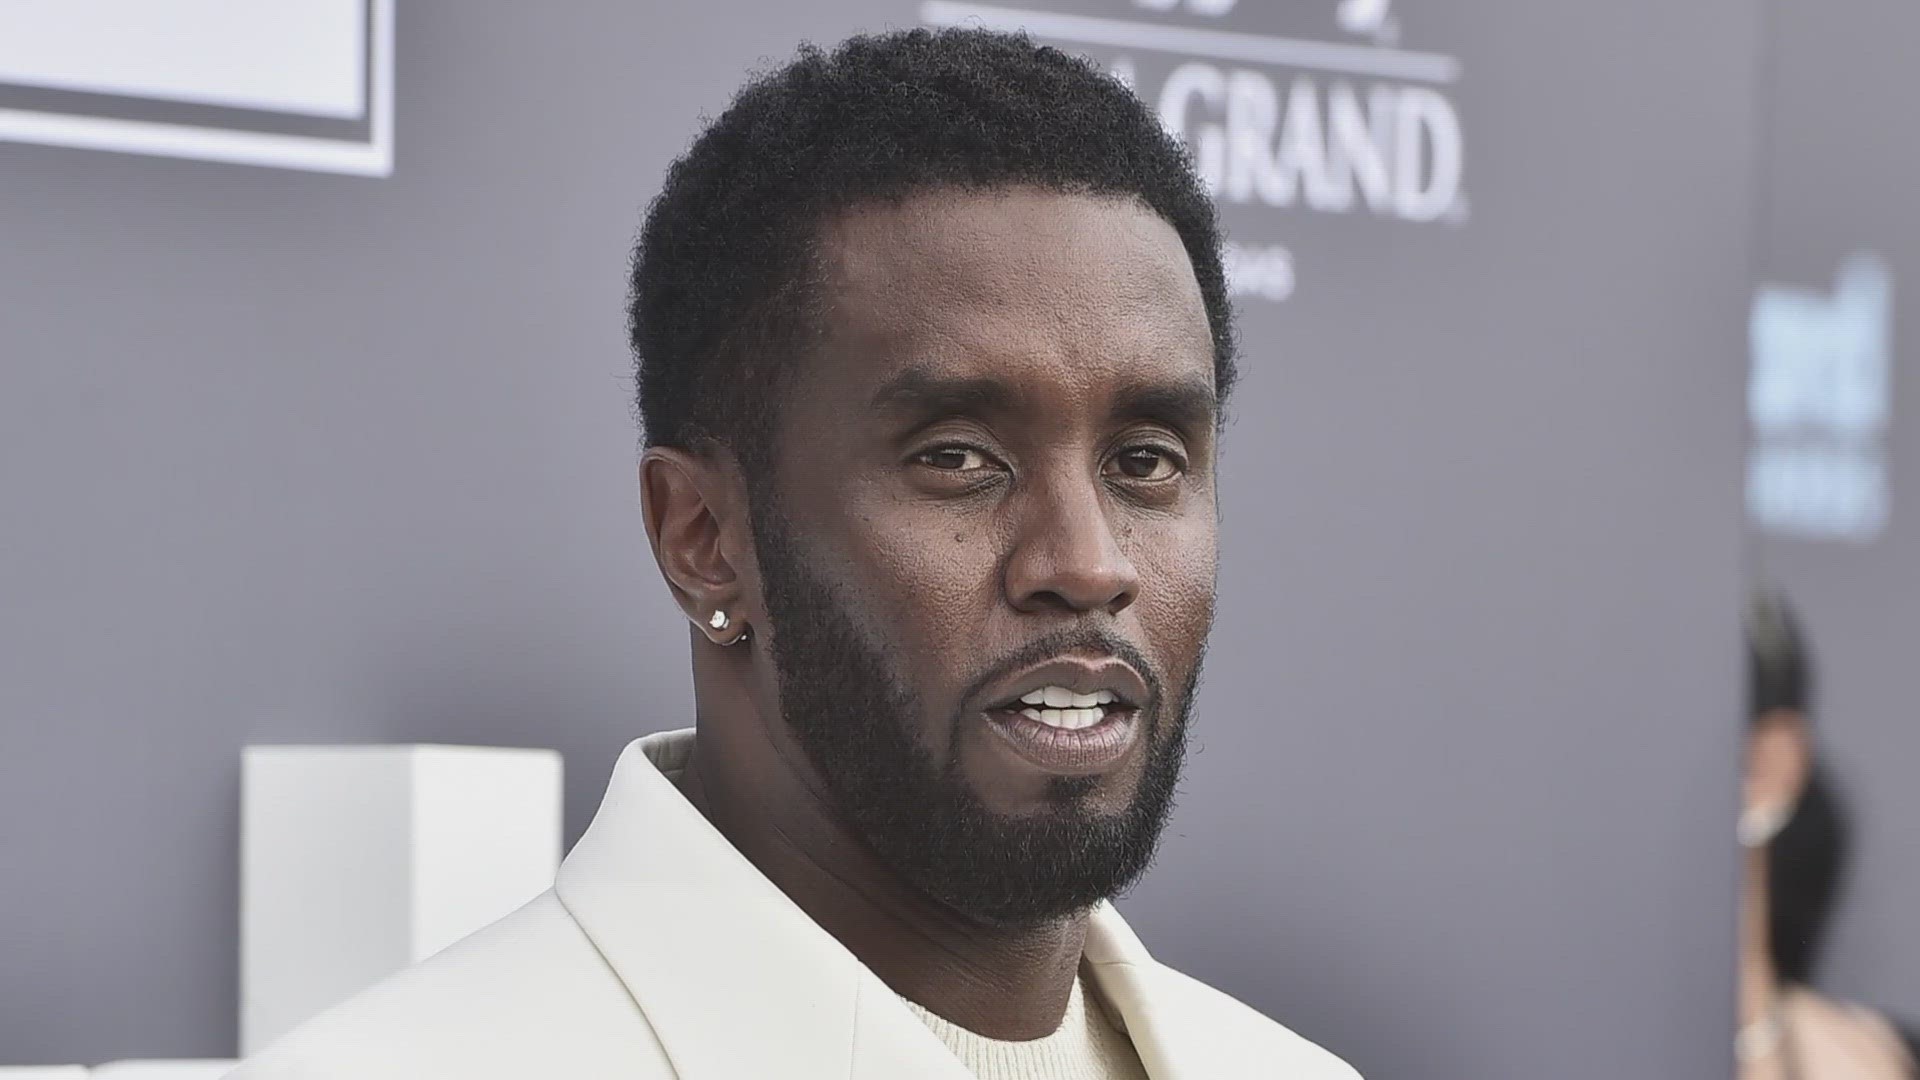 Producer Rodney 'Lil Rod' Jones is suing Sean "Diddy" Combs, alleging sexual assault, drugs and gun distribution.